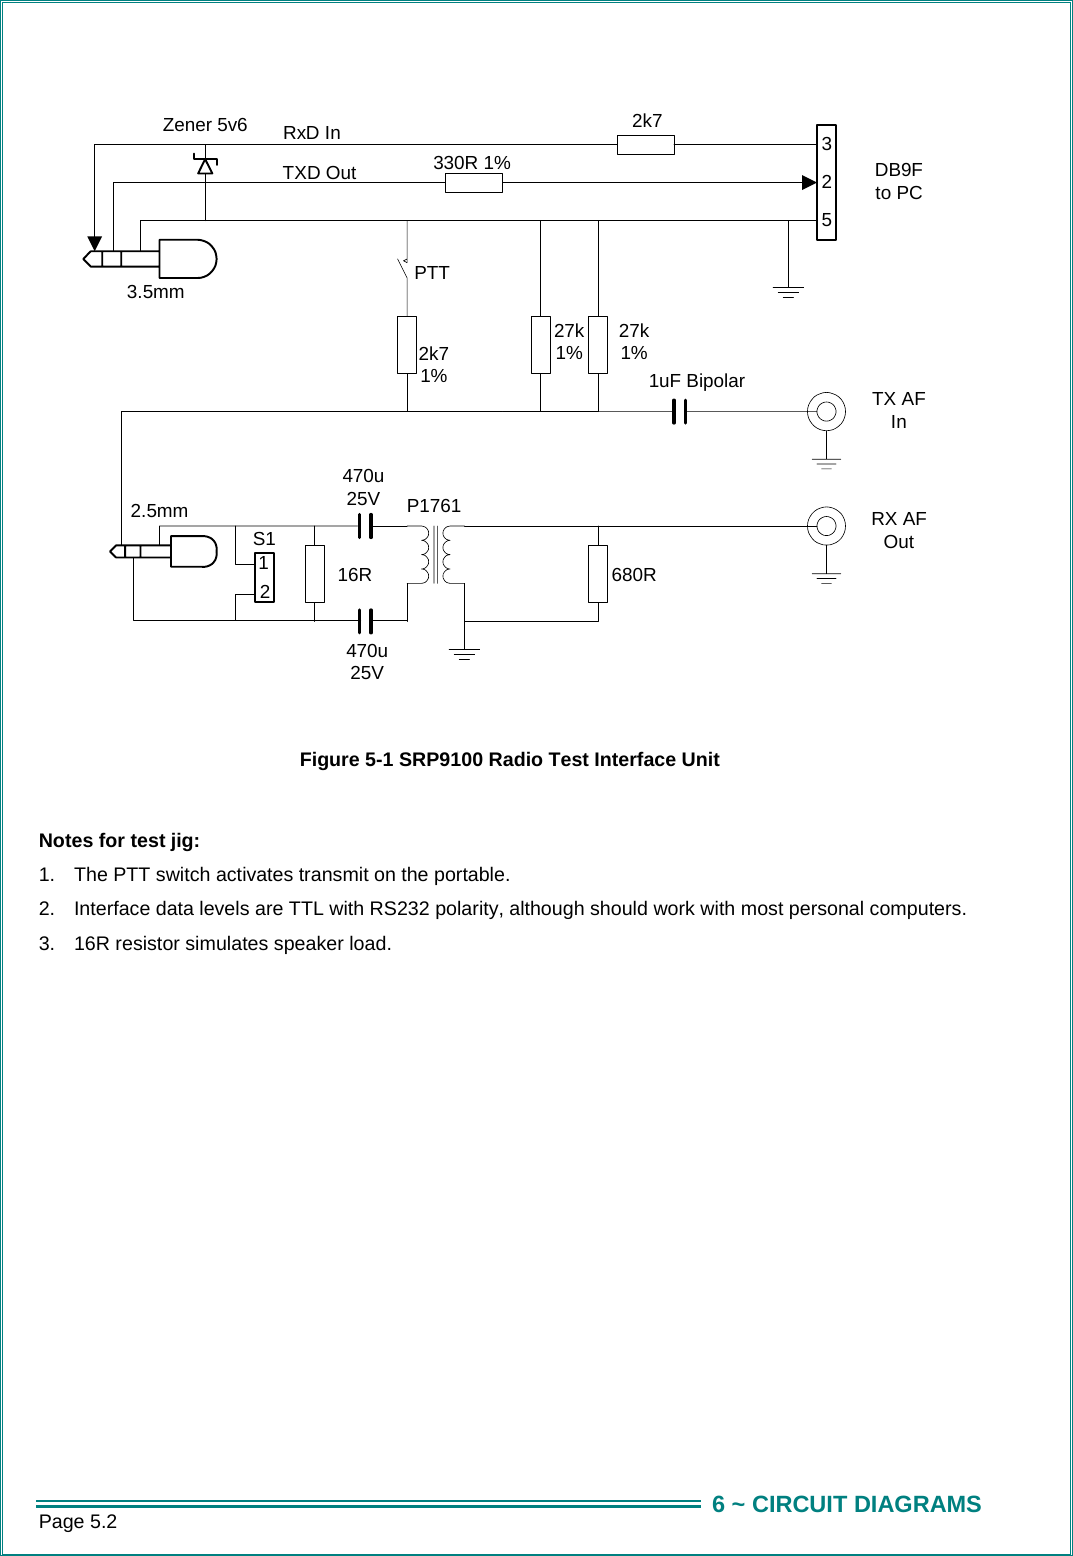 Page 5.2  6 ~ CIRCUIT DIAGRAMS 3.5mm2.5mmDB9Fto PC3330R 1% 252k71%27k1%PTT1uF Bipolar TX AFInRX AFOutP1761680R16RRxD InTXD Out470u25V470u25V2k7Zener 5v627k1%12S1  Figure 5-1 SRP9100 Radio Test Interface Unit  Notes for test jig: 1.  The PTT switch activates transmit on the portable. 2.  Interface data levels are TTL with RS232 polarity, although should work with most personal computers. 3.  16R resistor simulates speaker load. 